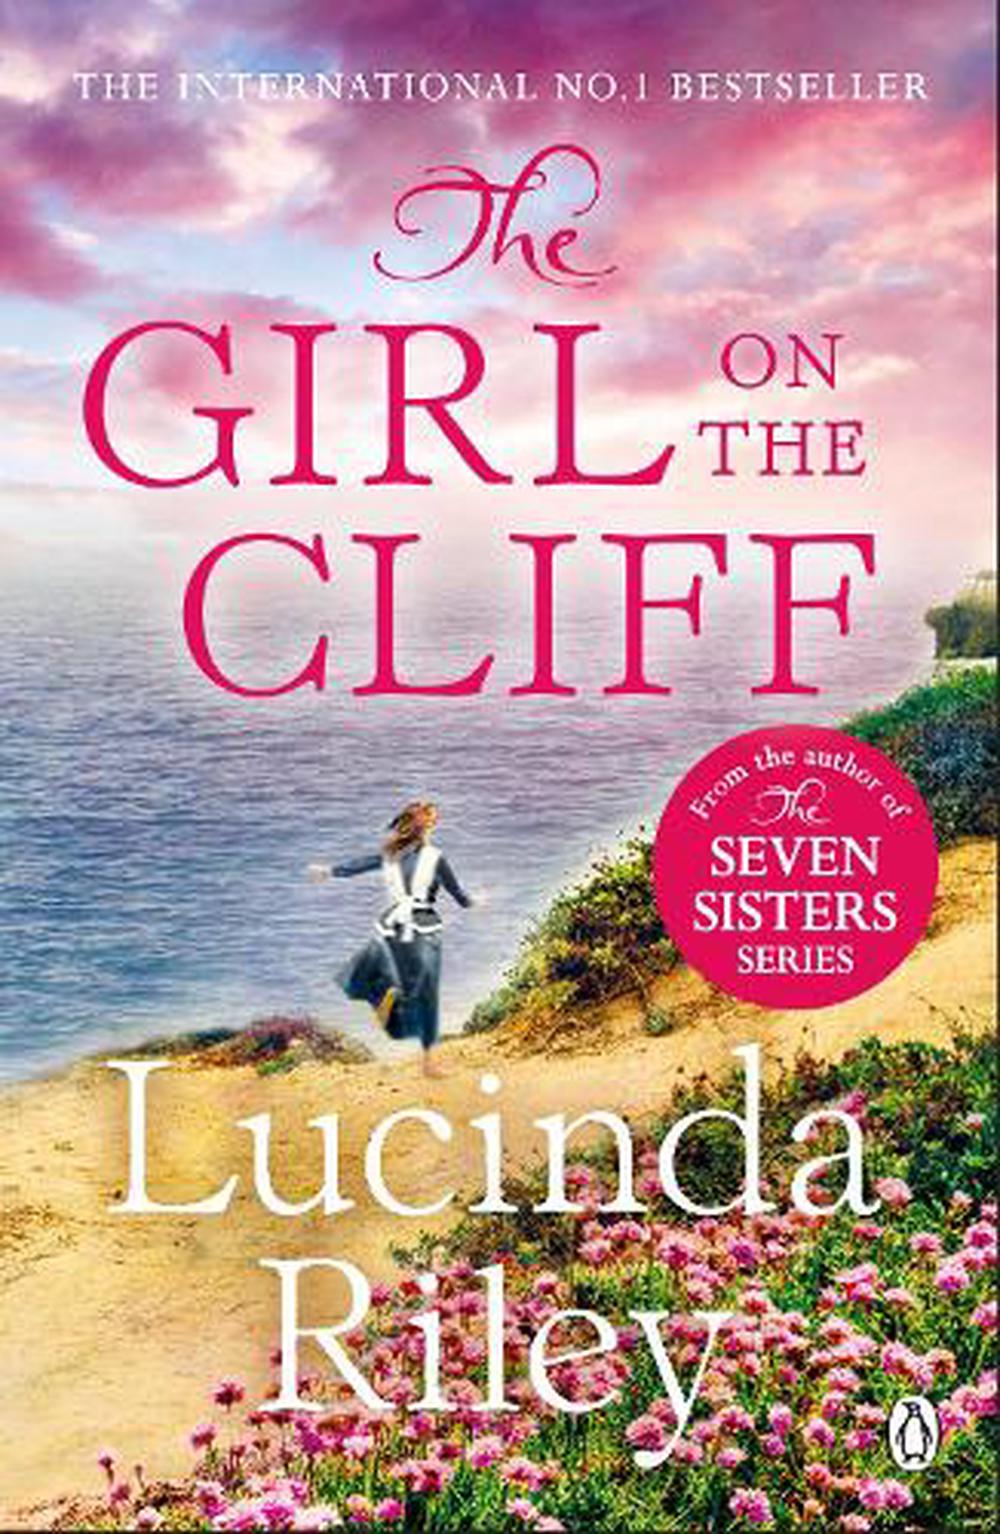 online　on　by　Buy　the　9780241954973　Nile　The　Lucinda　Riley,　Cliff　Girl　The　Paperback,　at